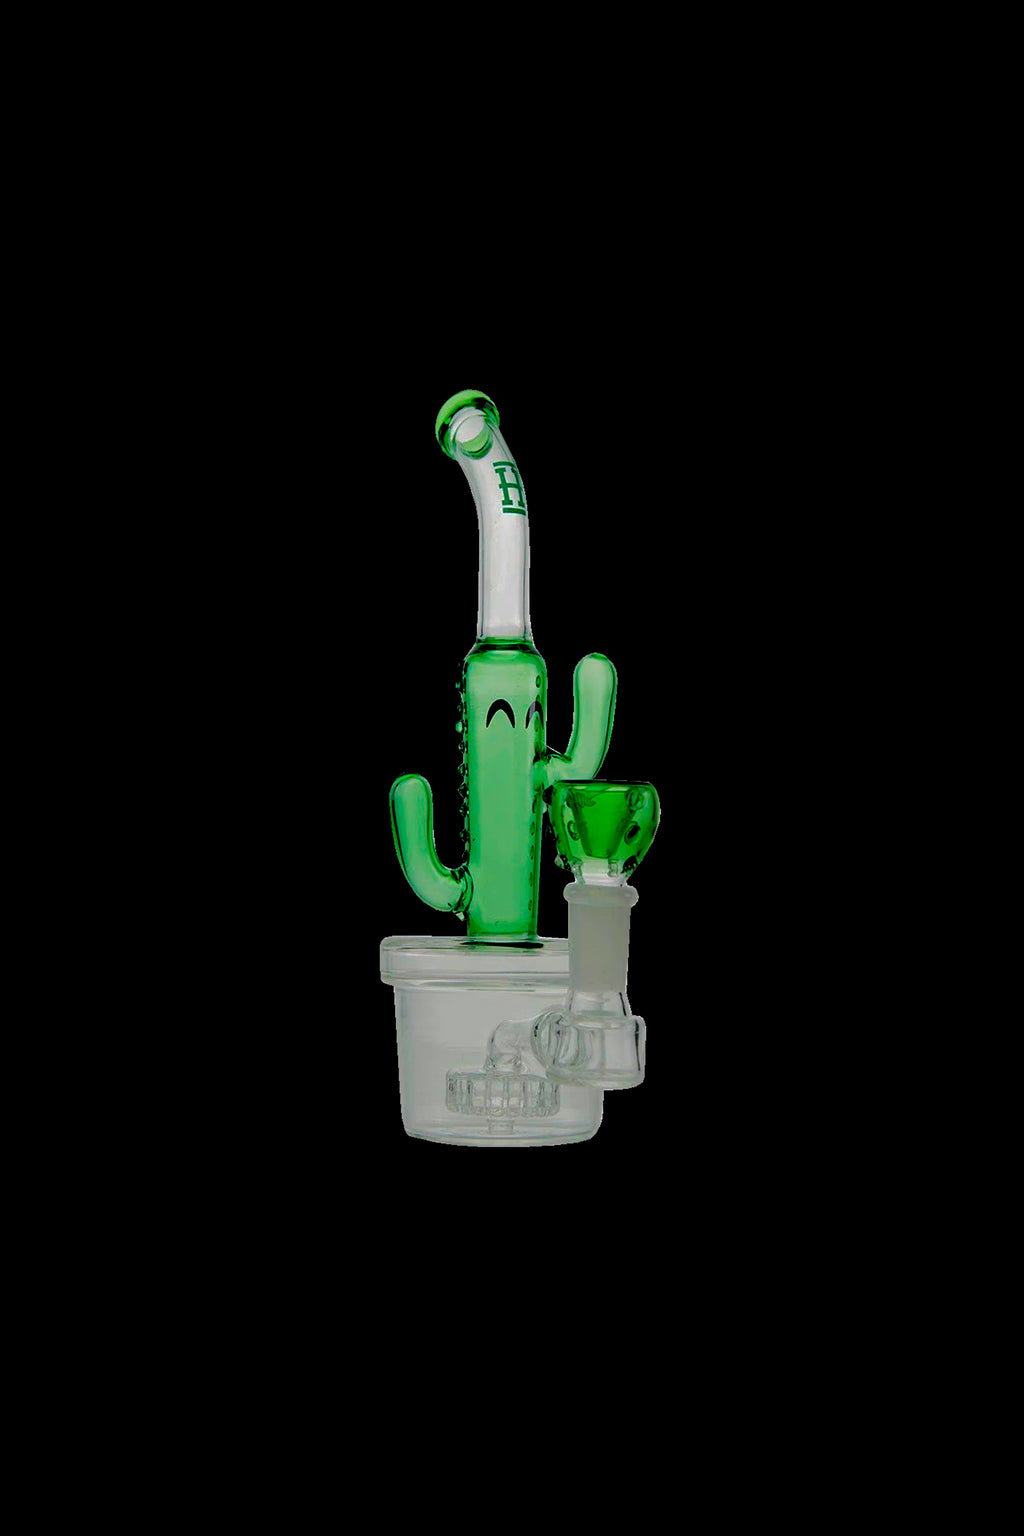 Buy Glass Pipes Online  Smoking Glass Pipes For Sale - HEMPER